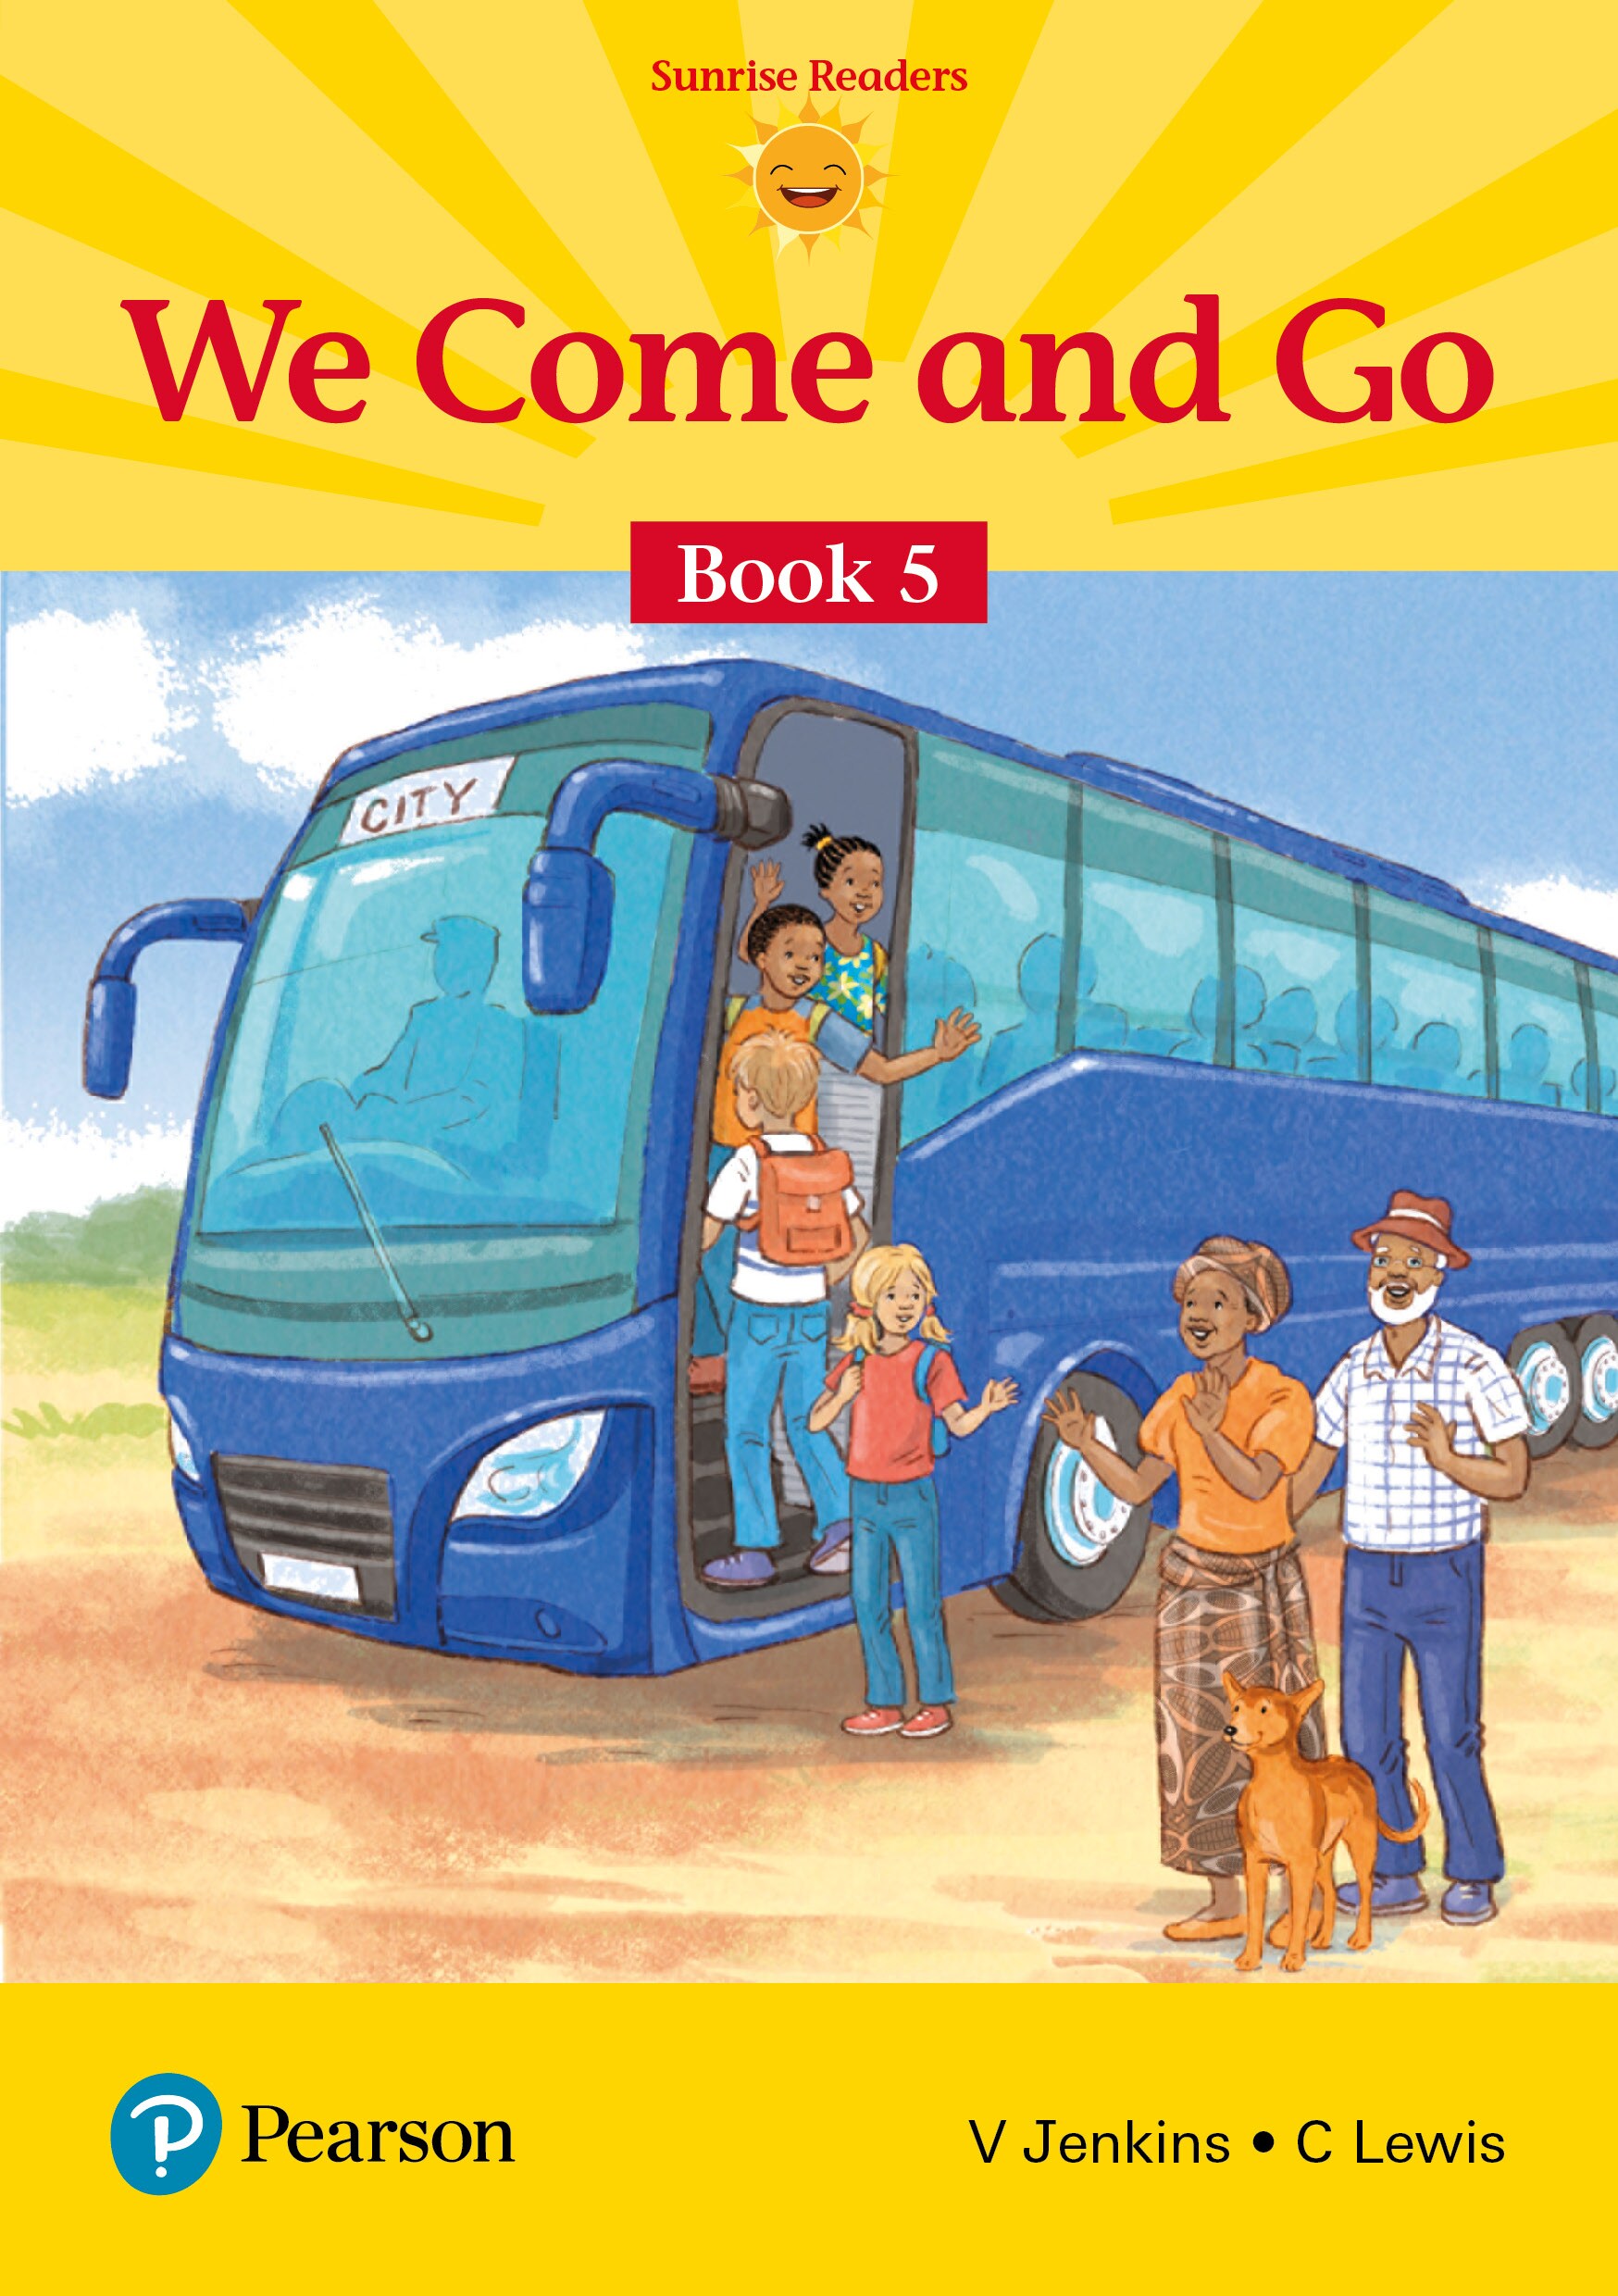 We Come and Go - Book 5